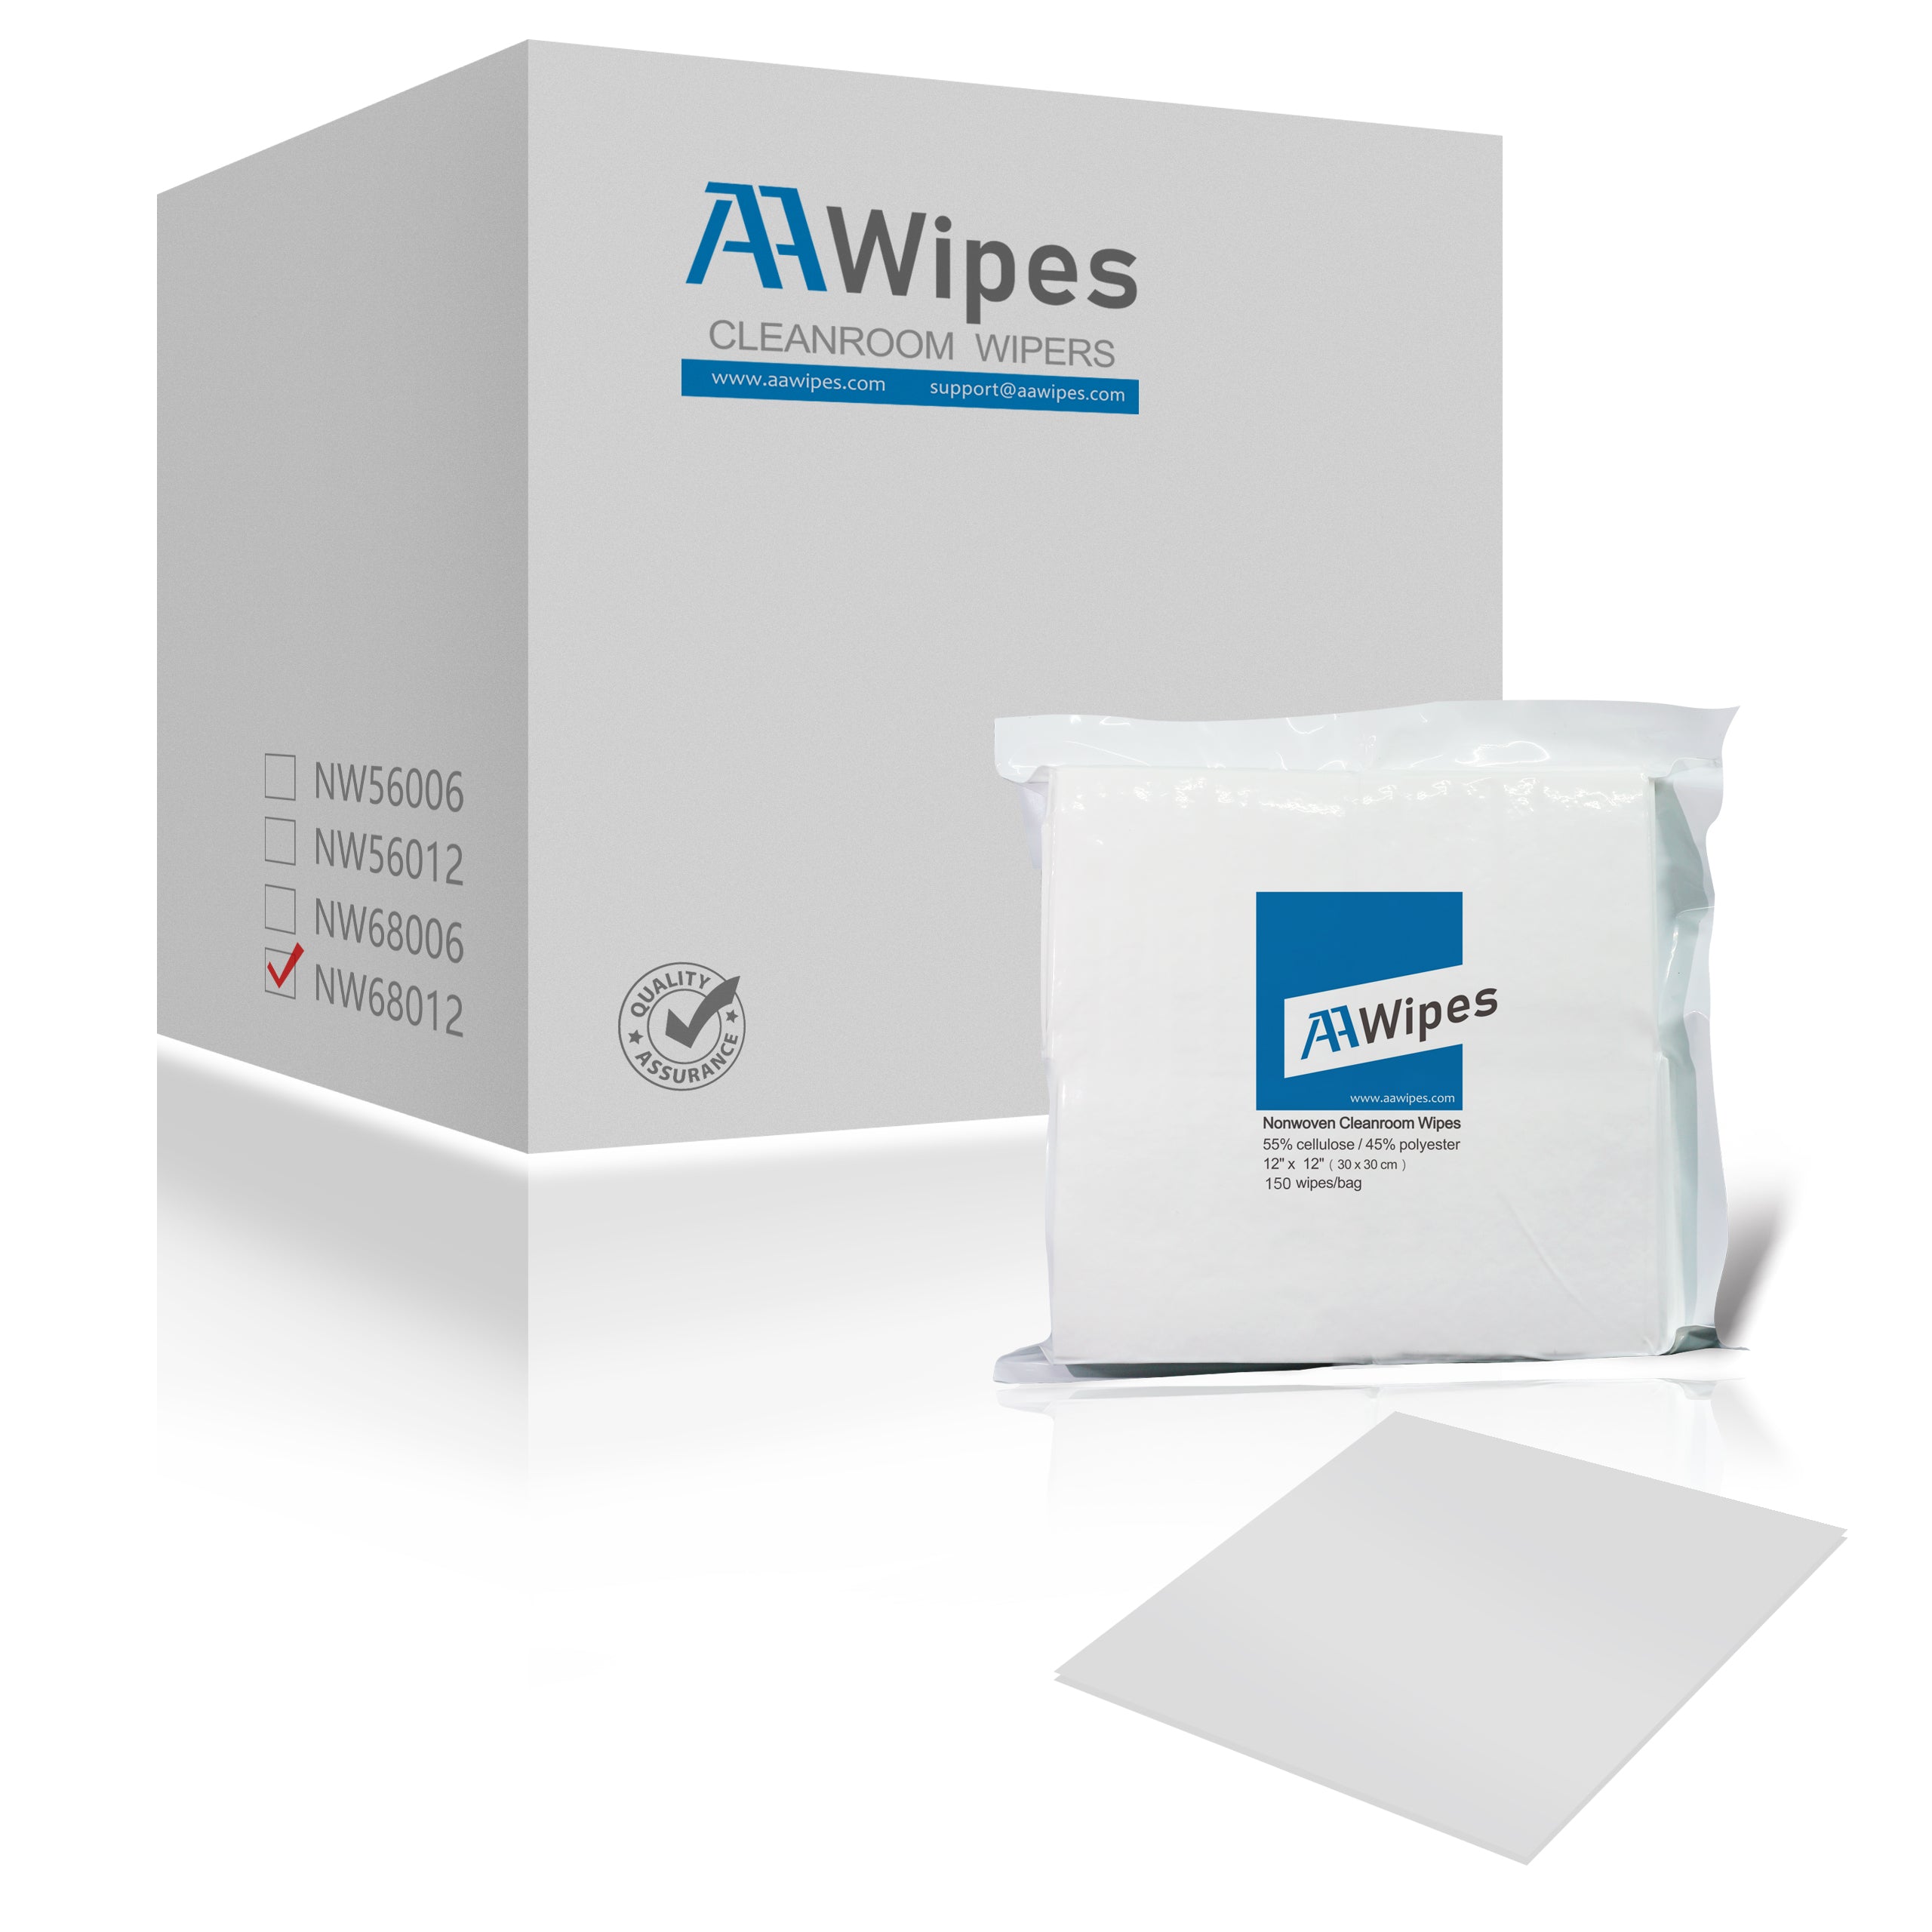 Cleanroom Wipes, Cellulose/Polyester Blend, 12" x 12" (15,000 Wipes per Case, 100 Bags per Case, 56 gsm) (No. NW05612, Previous No. IPW-1212-56-150)